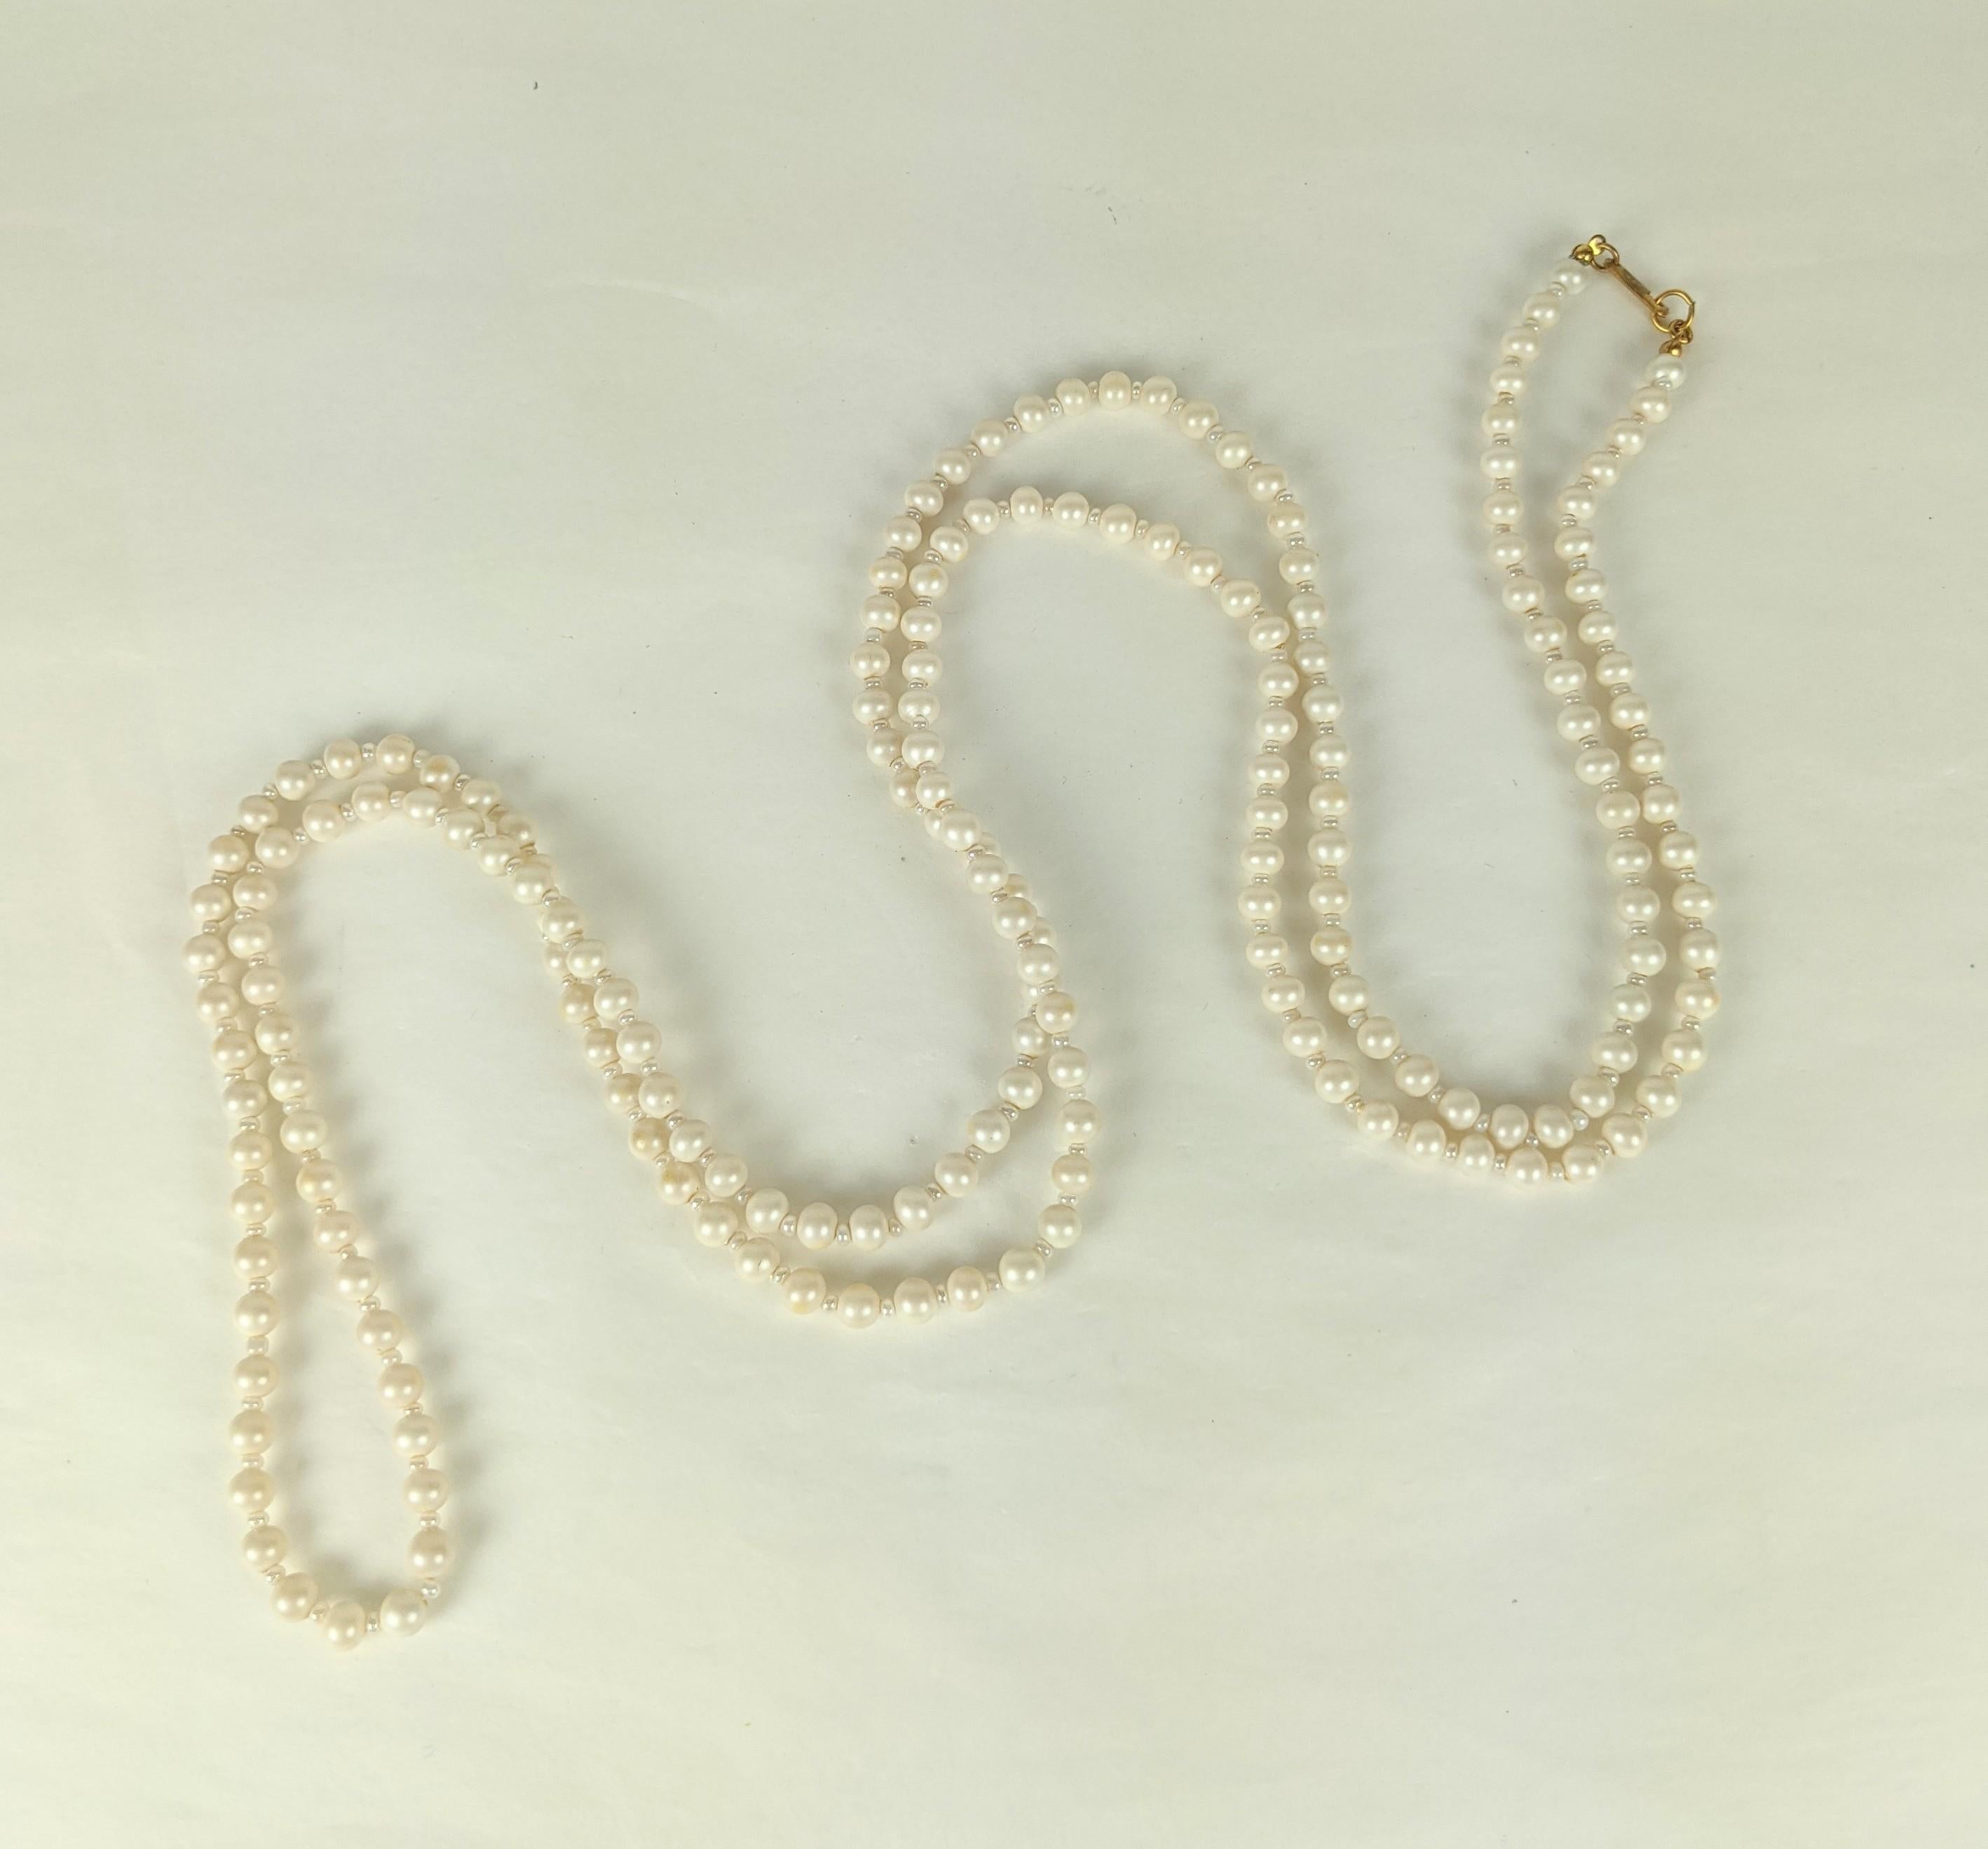 Miriam Haskell Long Faux Pearl Necklace of freshwater pearls with signed clasp. Long strand that can be wrapped several times. 52